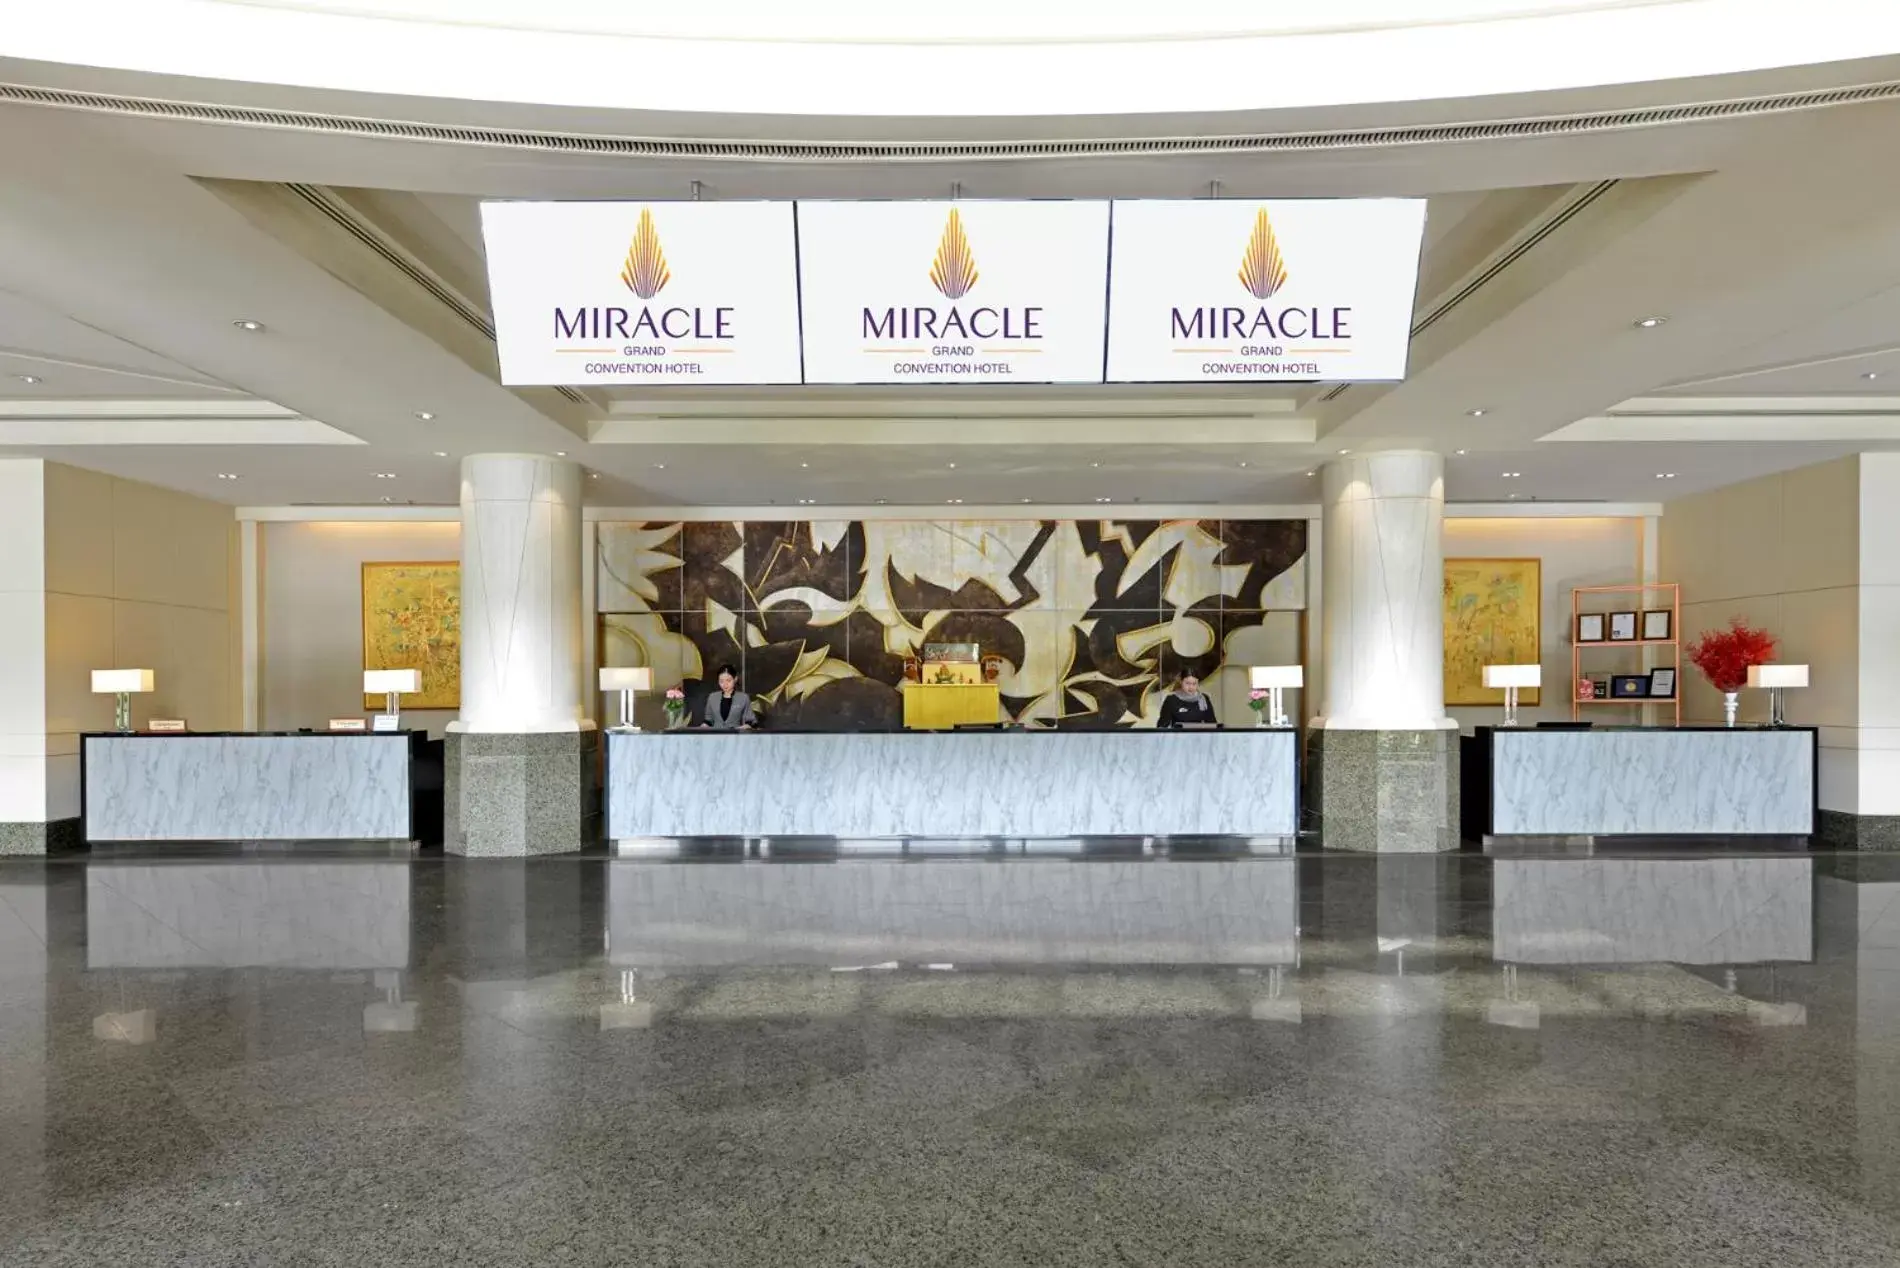 Lobby or reception in Miracle Grand Convention Hotel